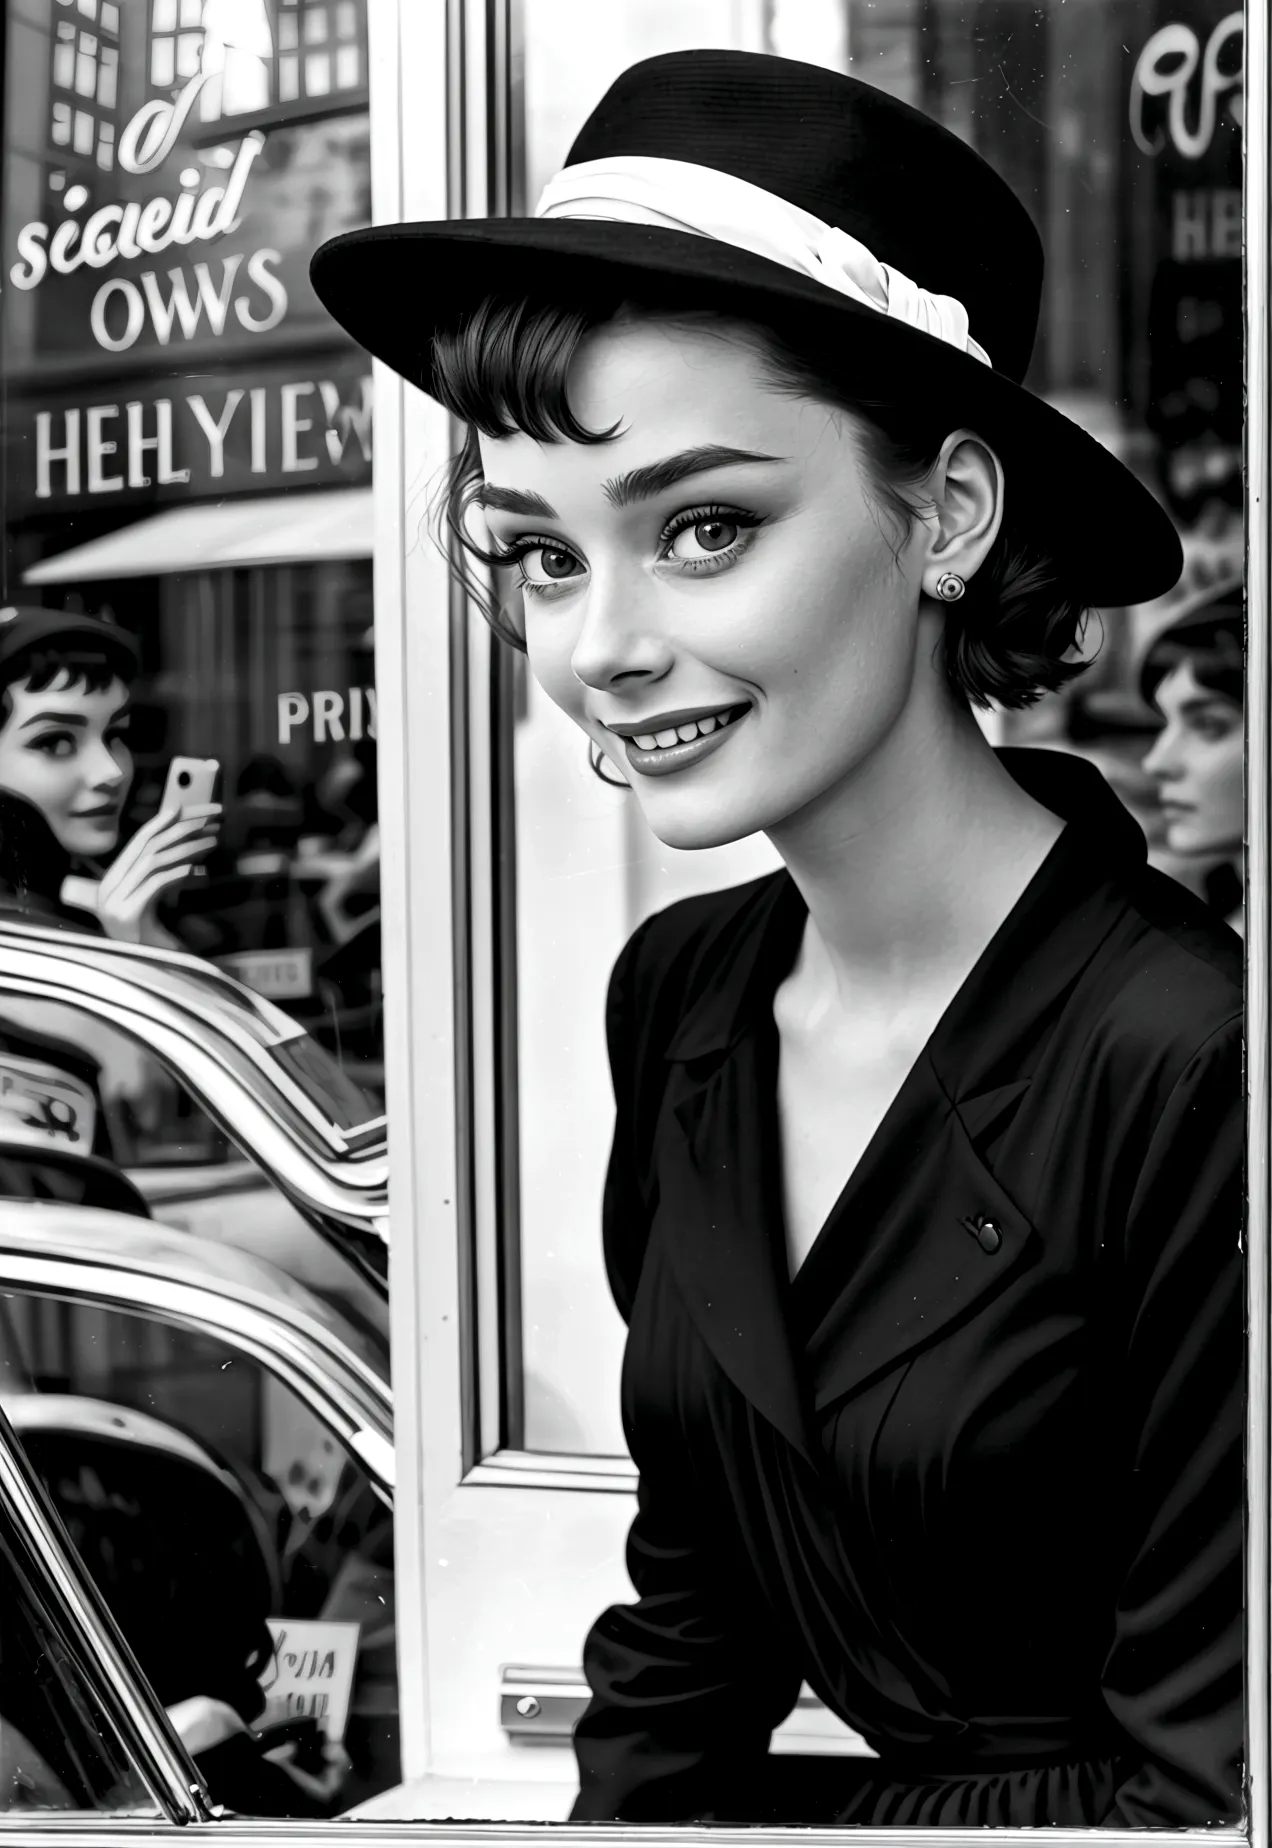 Photograph of a 20-year-old woman who resembles Audrey Hepburn: short dark hair, large expressive eyes and an elegant, understat...